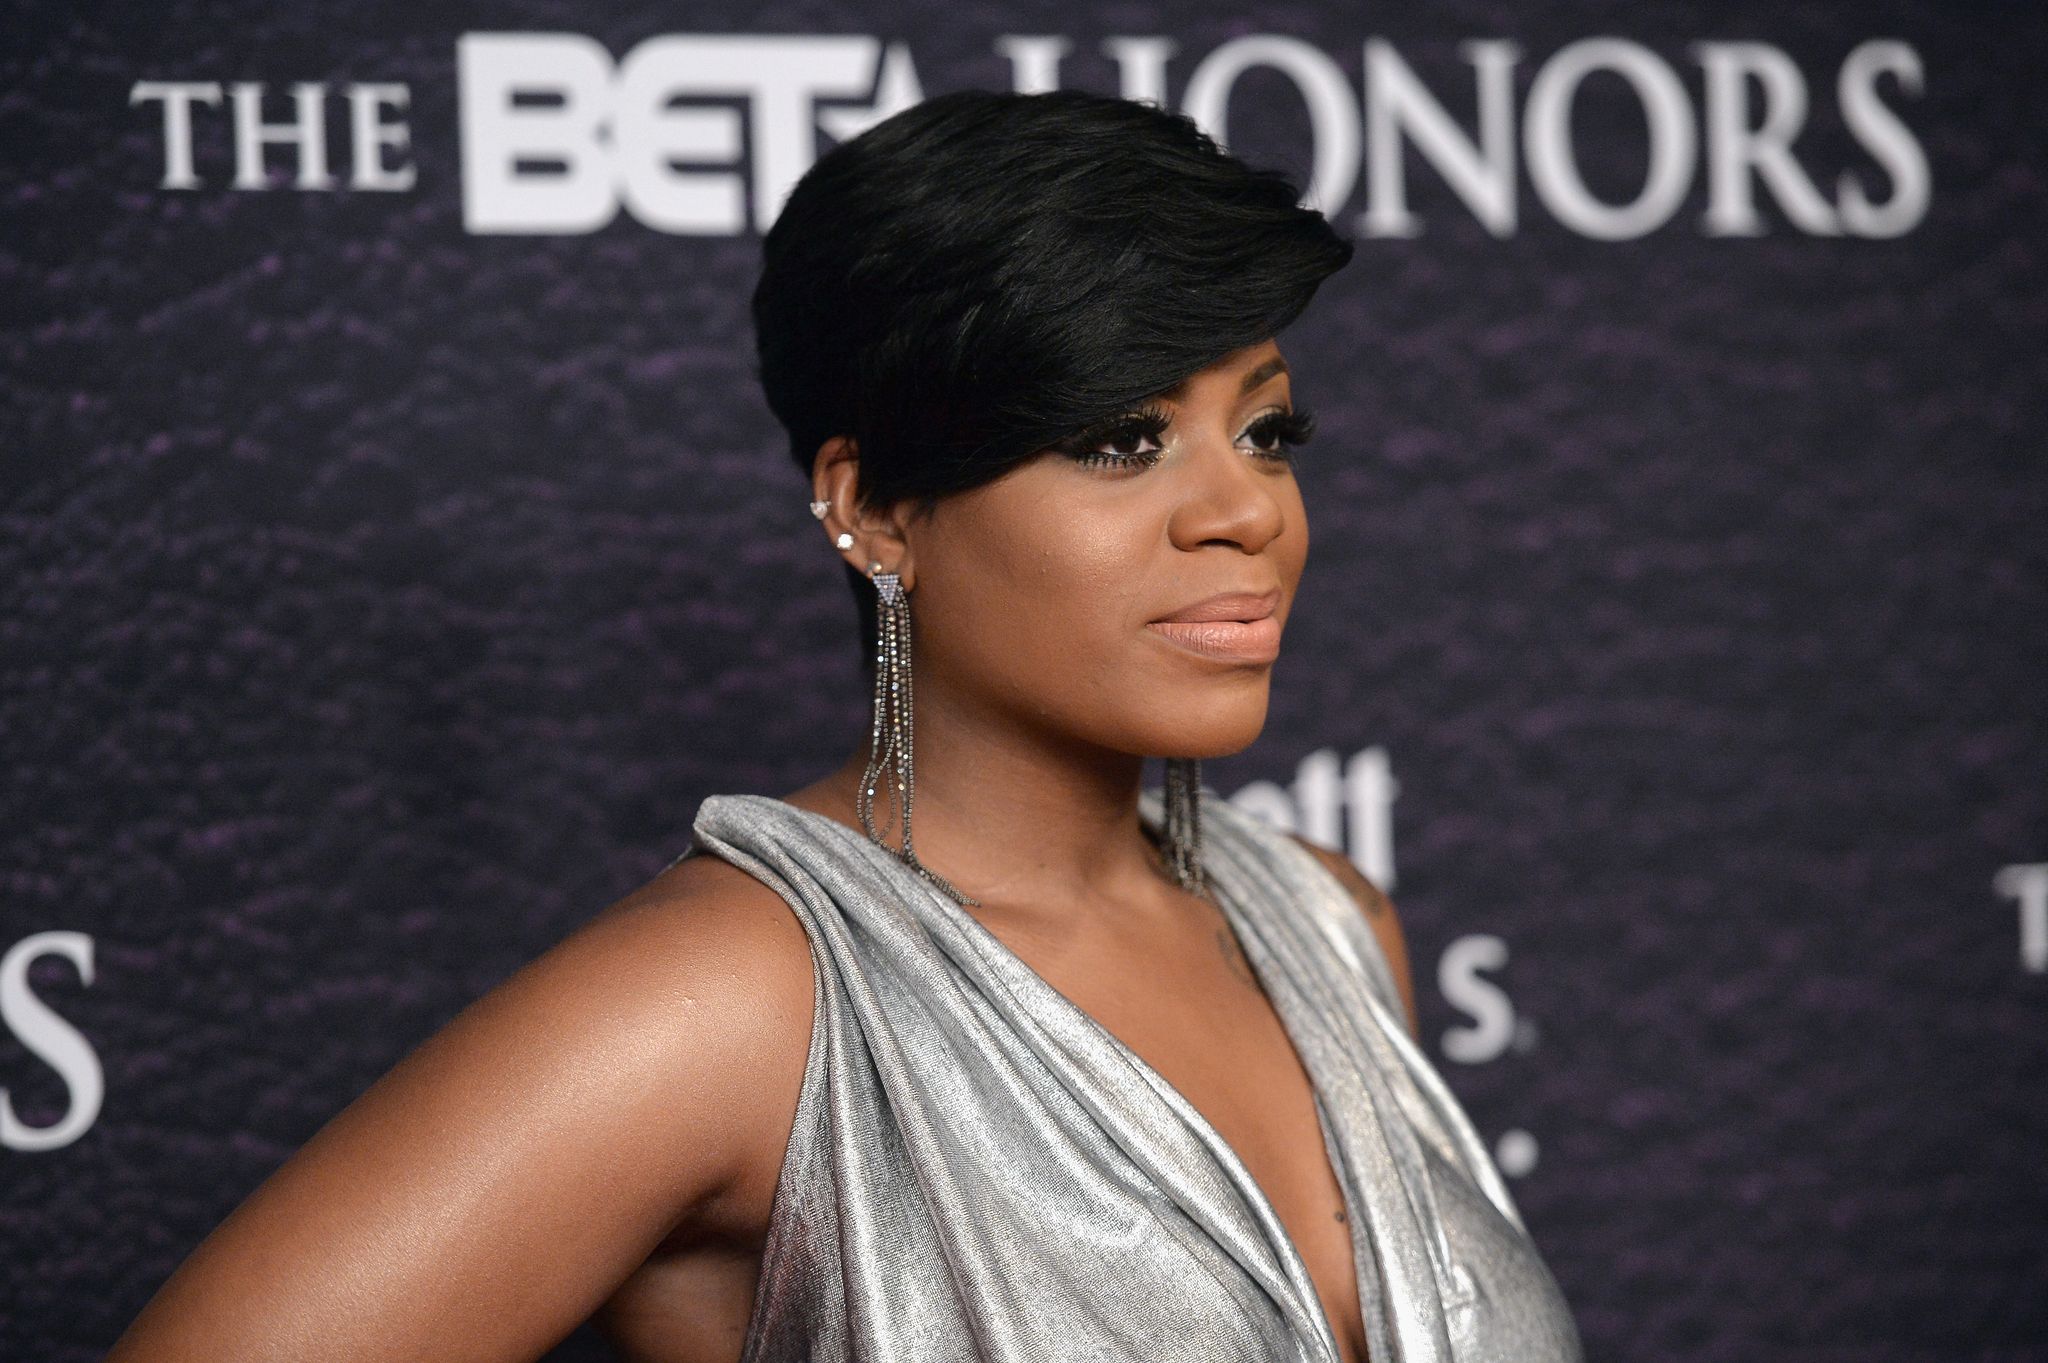 Fantasia at the BET Honors 2016 on March 5, 2016 in Washington. |  Photo: Getty Images